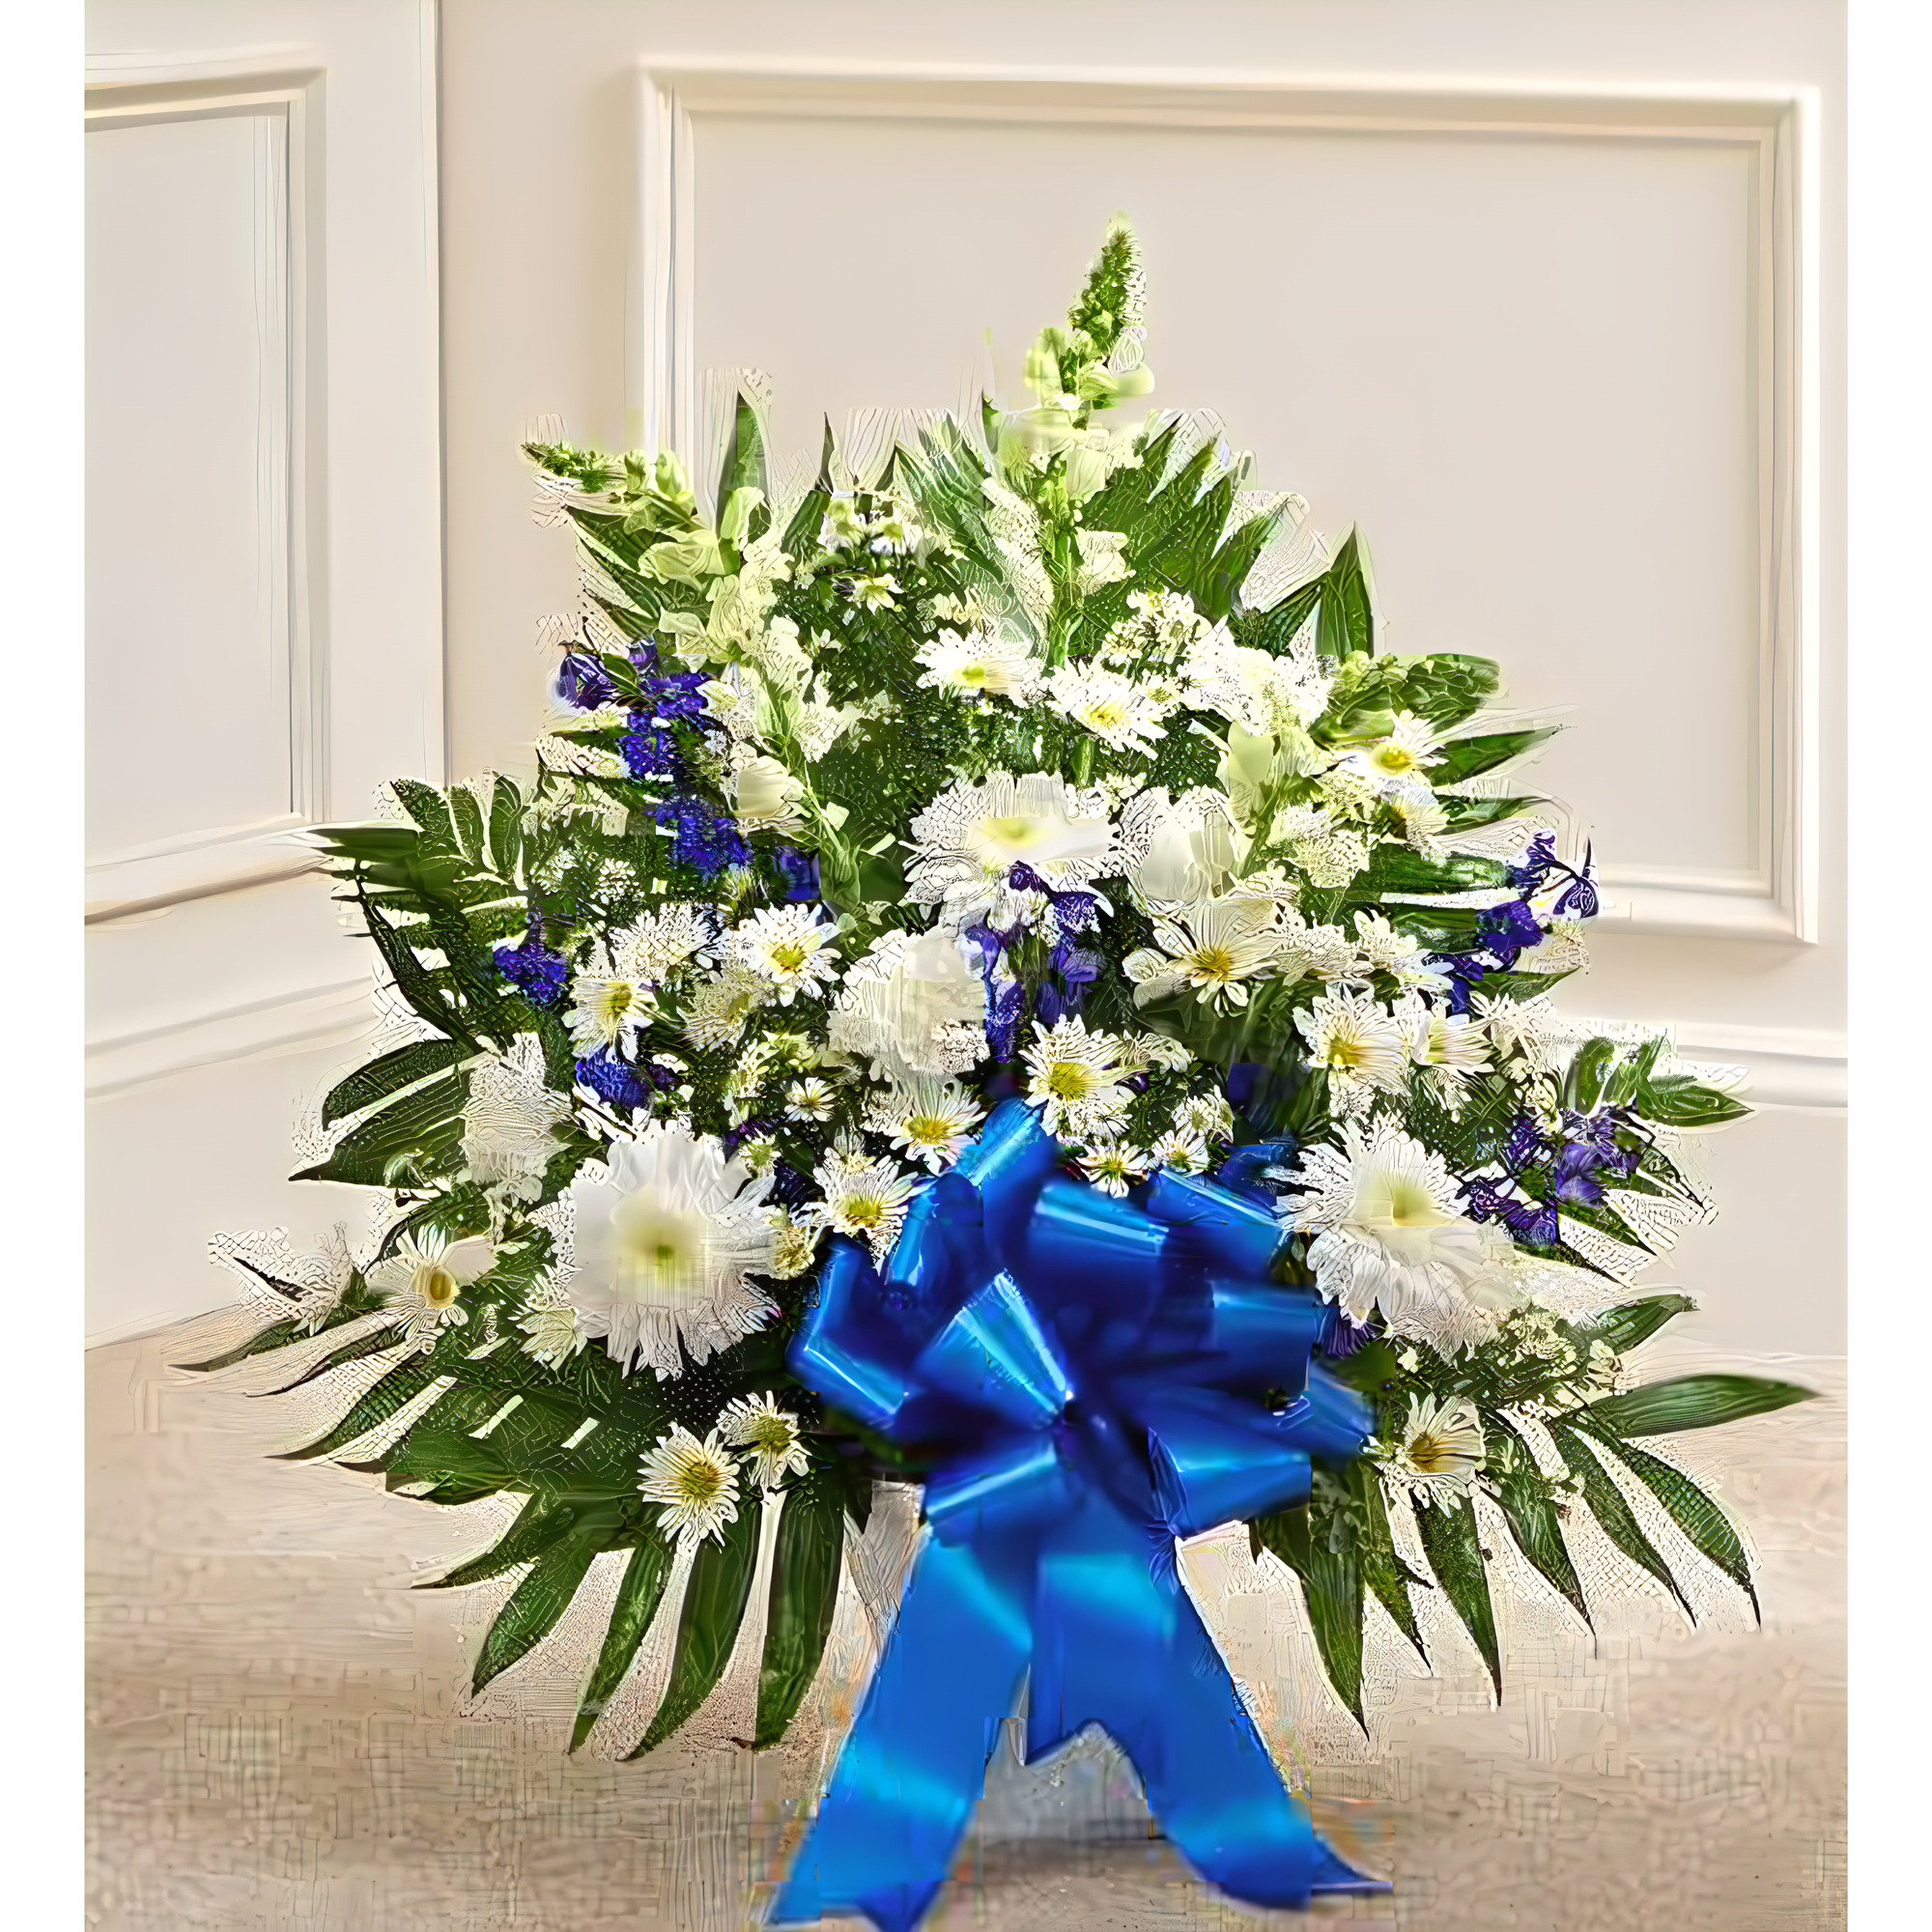 NYC Flower Delivery - Tribute Blue & White Floor Basket Arrangement - Funeral > For the Service